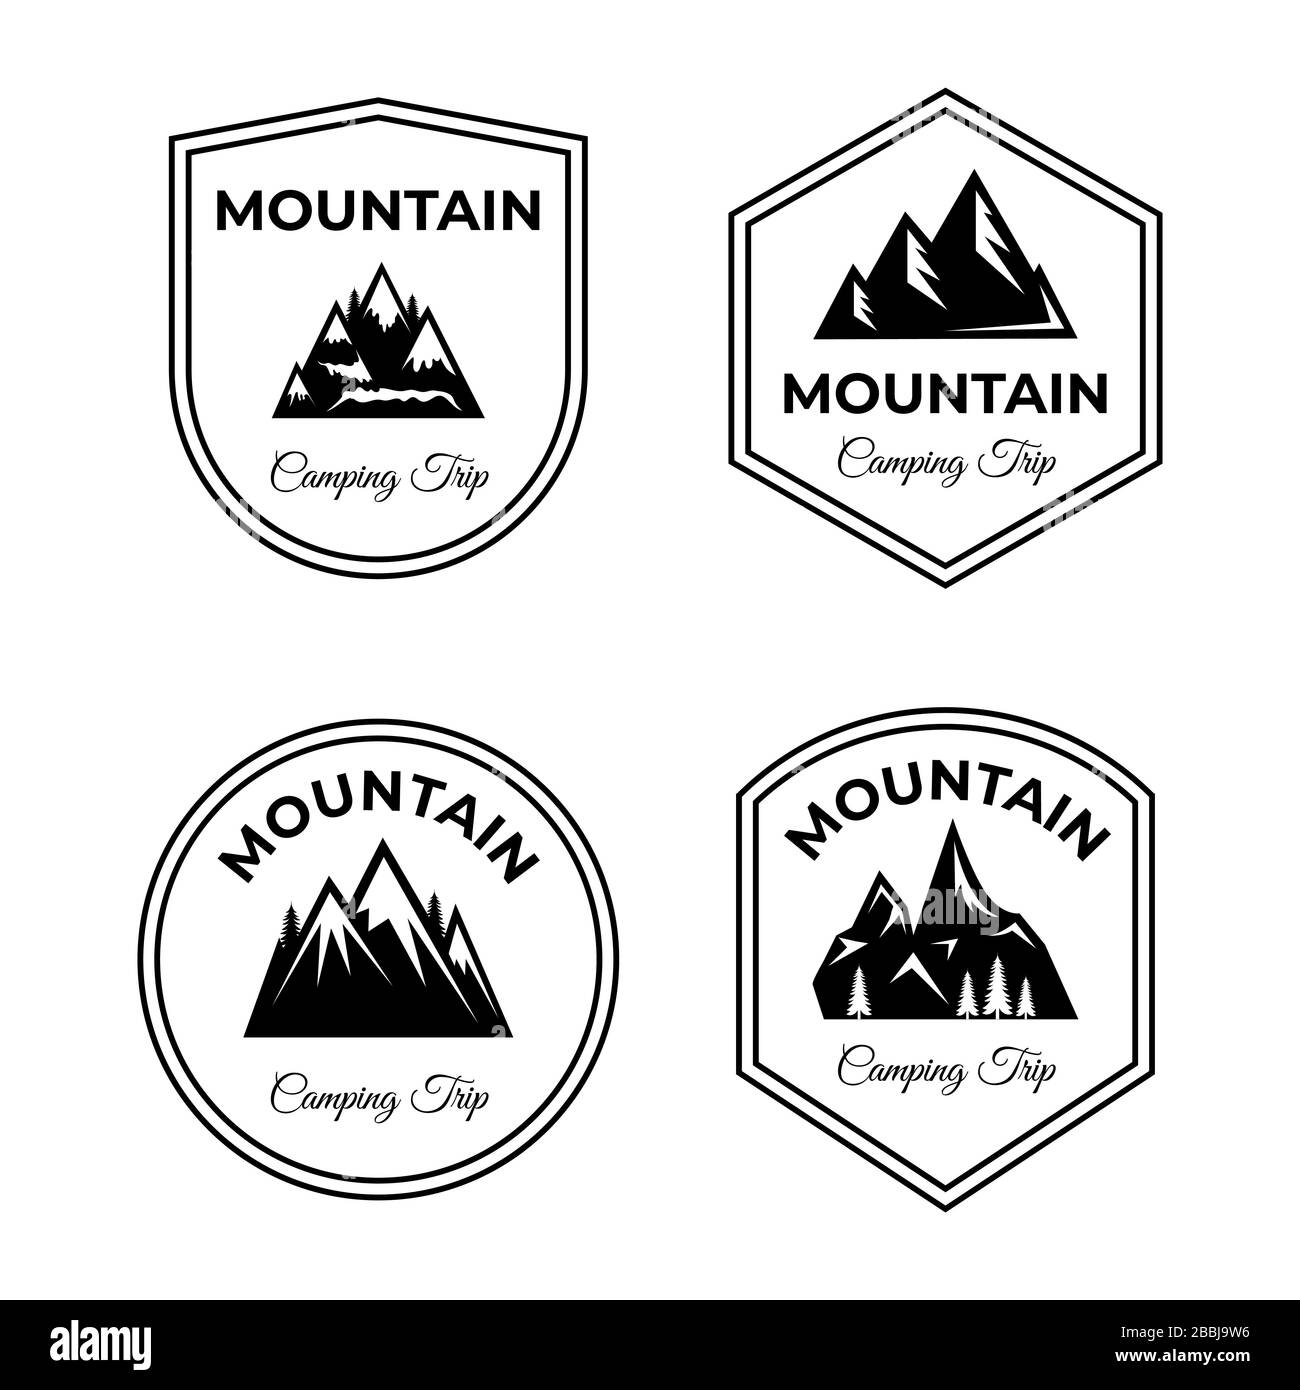 Mountain, camping trip vector logo design. Silhouettes peaks of mounts with text space. Active lifestyle, hiking, climbing, living on nature, traveling in alps icons isolated on white background. Stock Vector